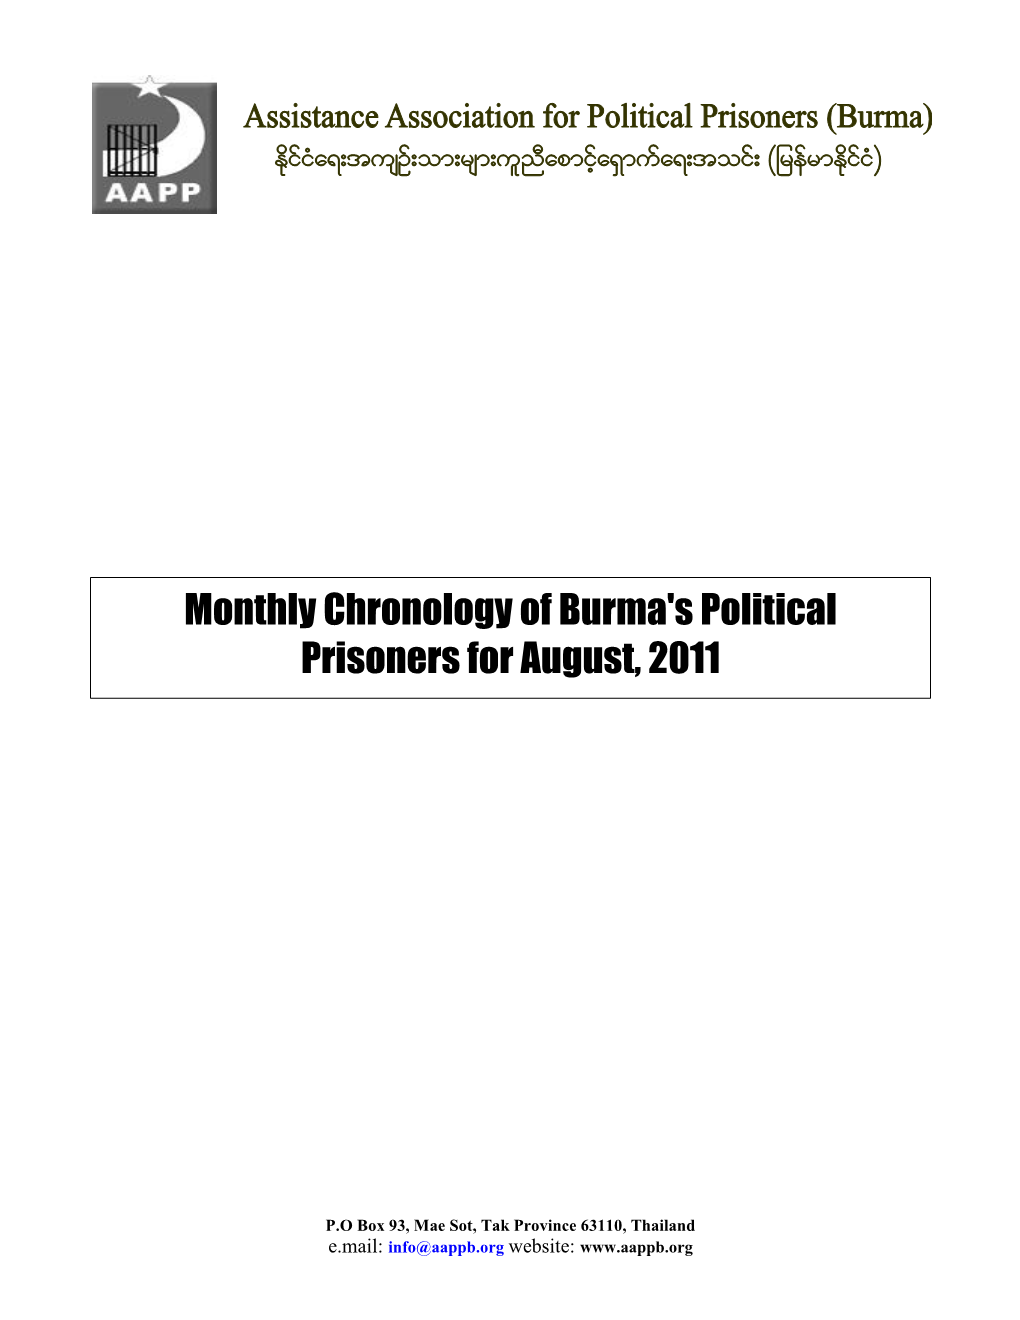 8-Monthly Chronology of Burma Political Prisoners for August 2011